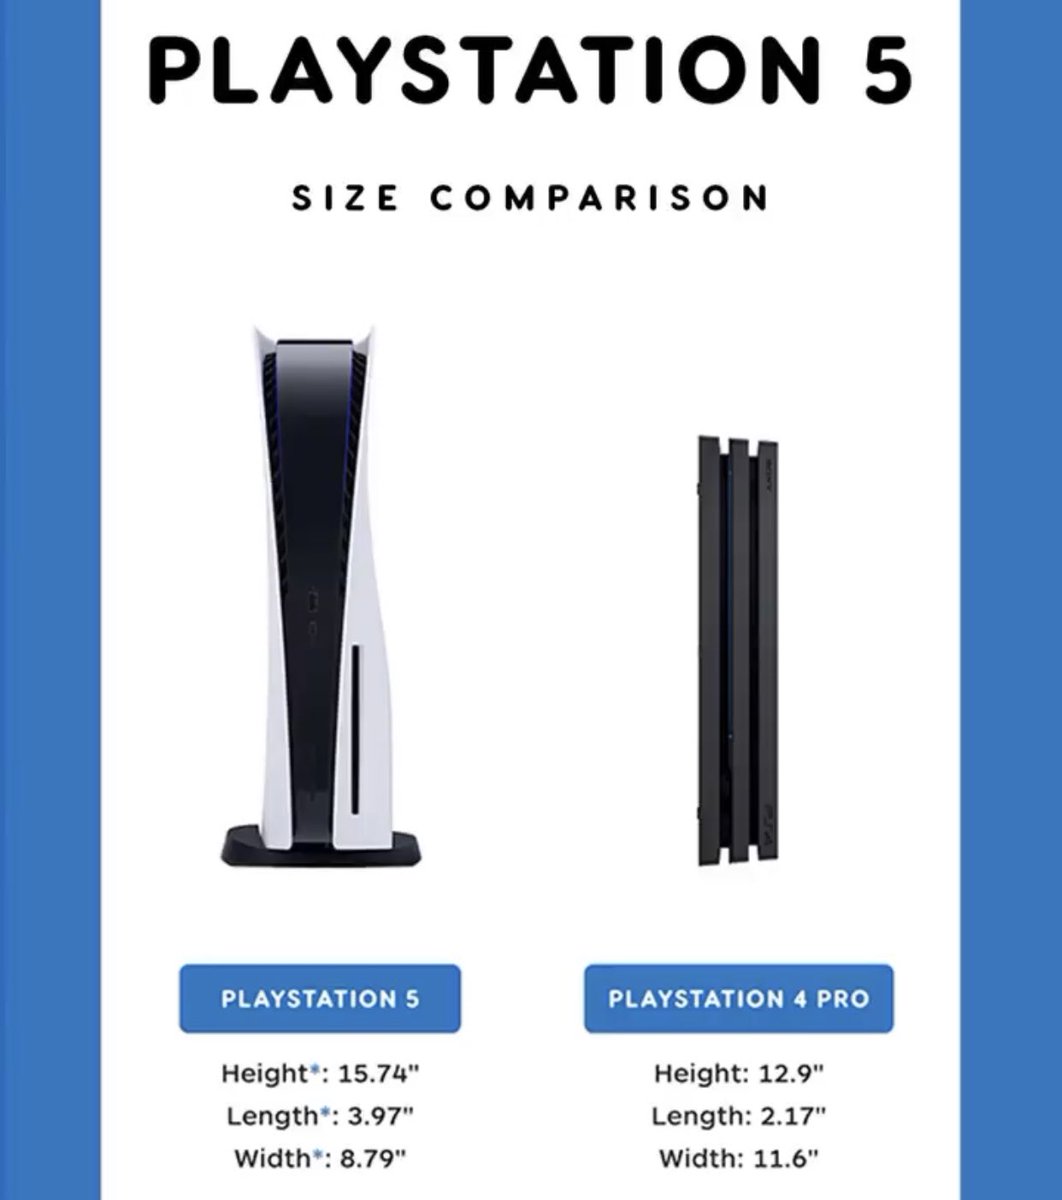 Omgivelser Sow kost Geek Vibes Nation on Twitter: "The #PS5 size comparison to the #PS4 (@IGN)  https://t.co/alsPEIlOId" / Twitter